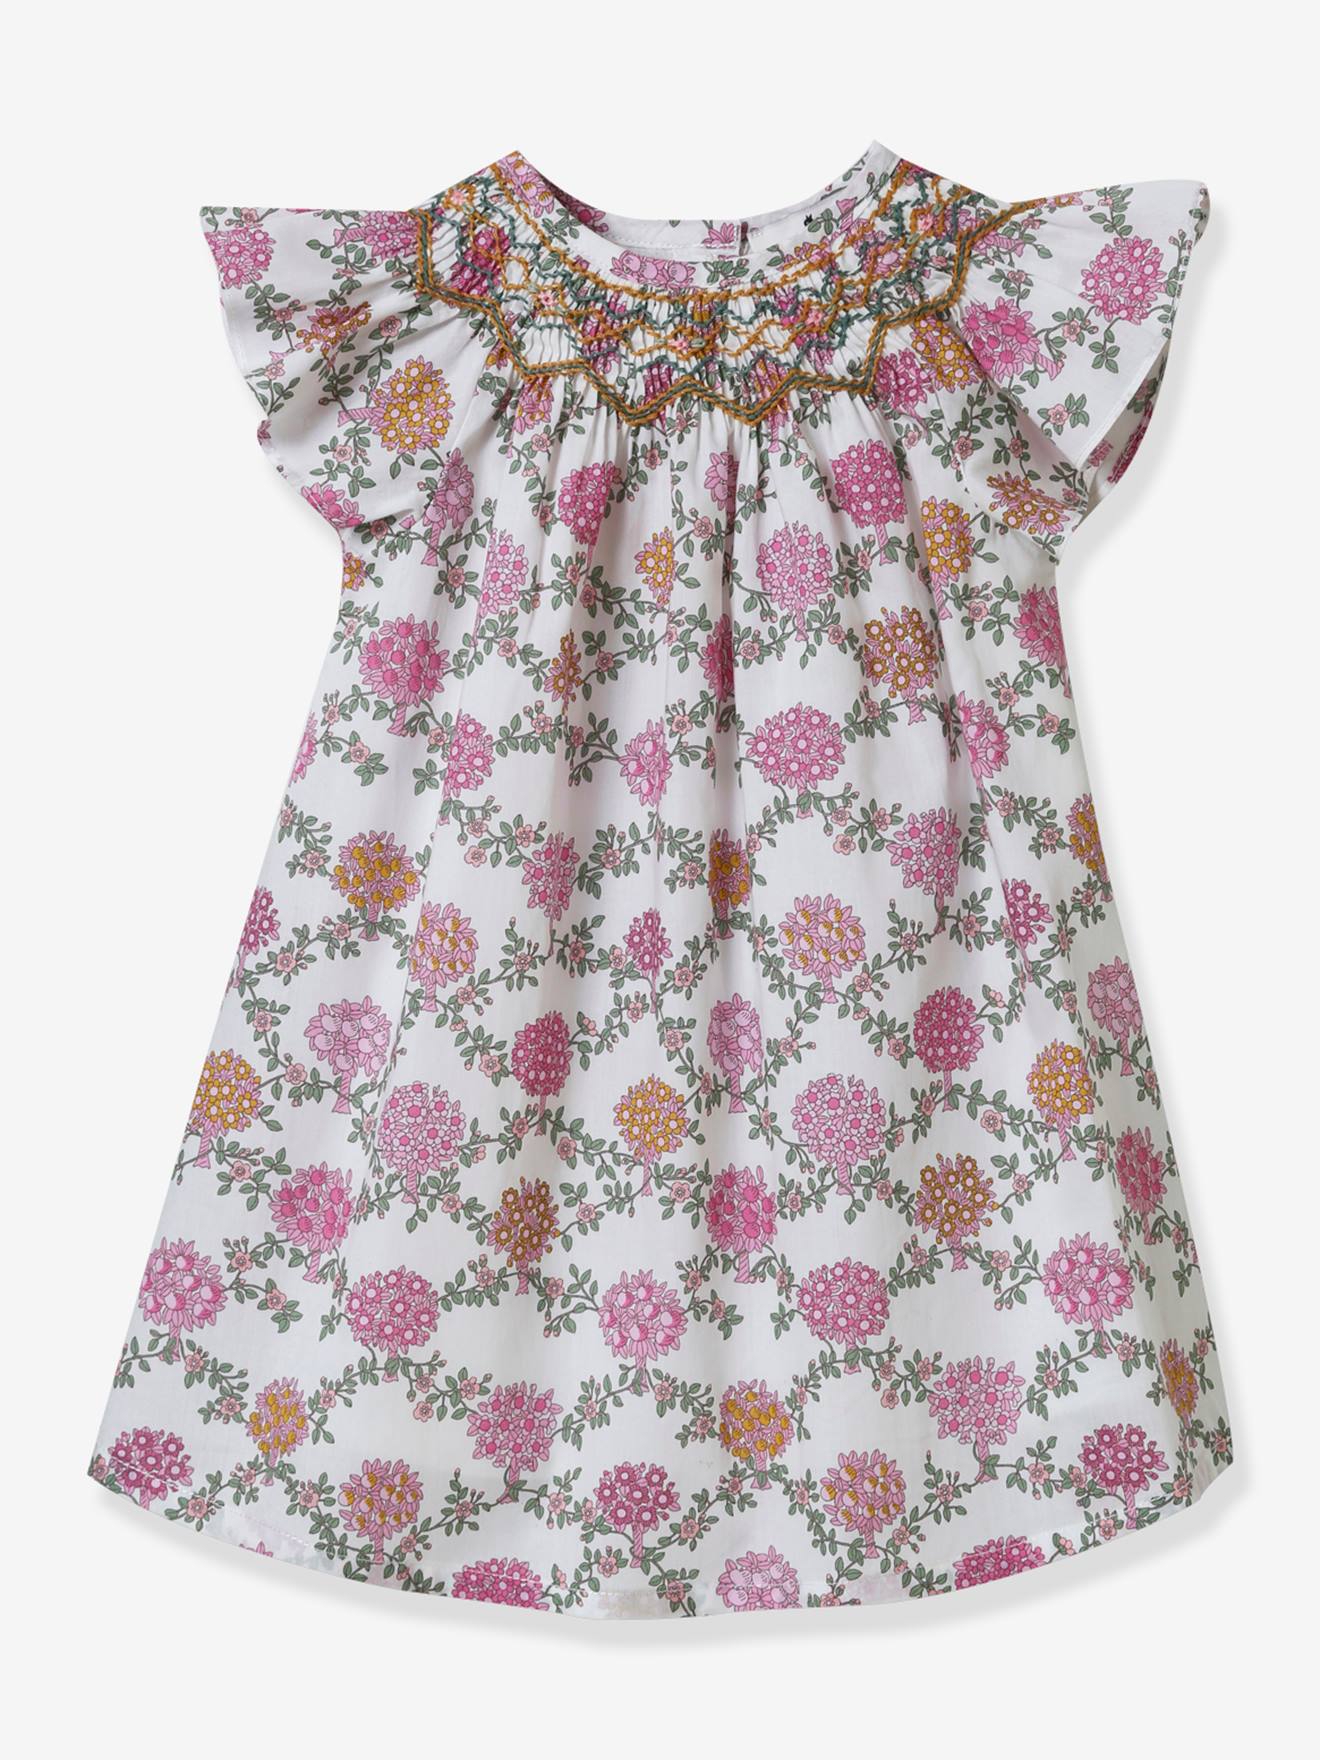 Ana Dress for Babies in Liberty(r) Fabric - Parties & Weddings Collection by CYRILLUS printed white